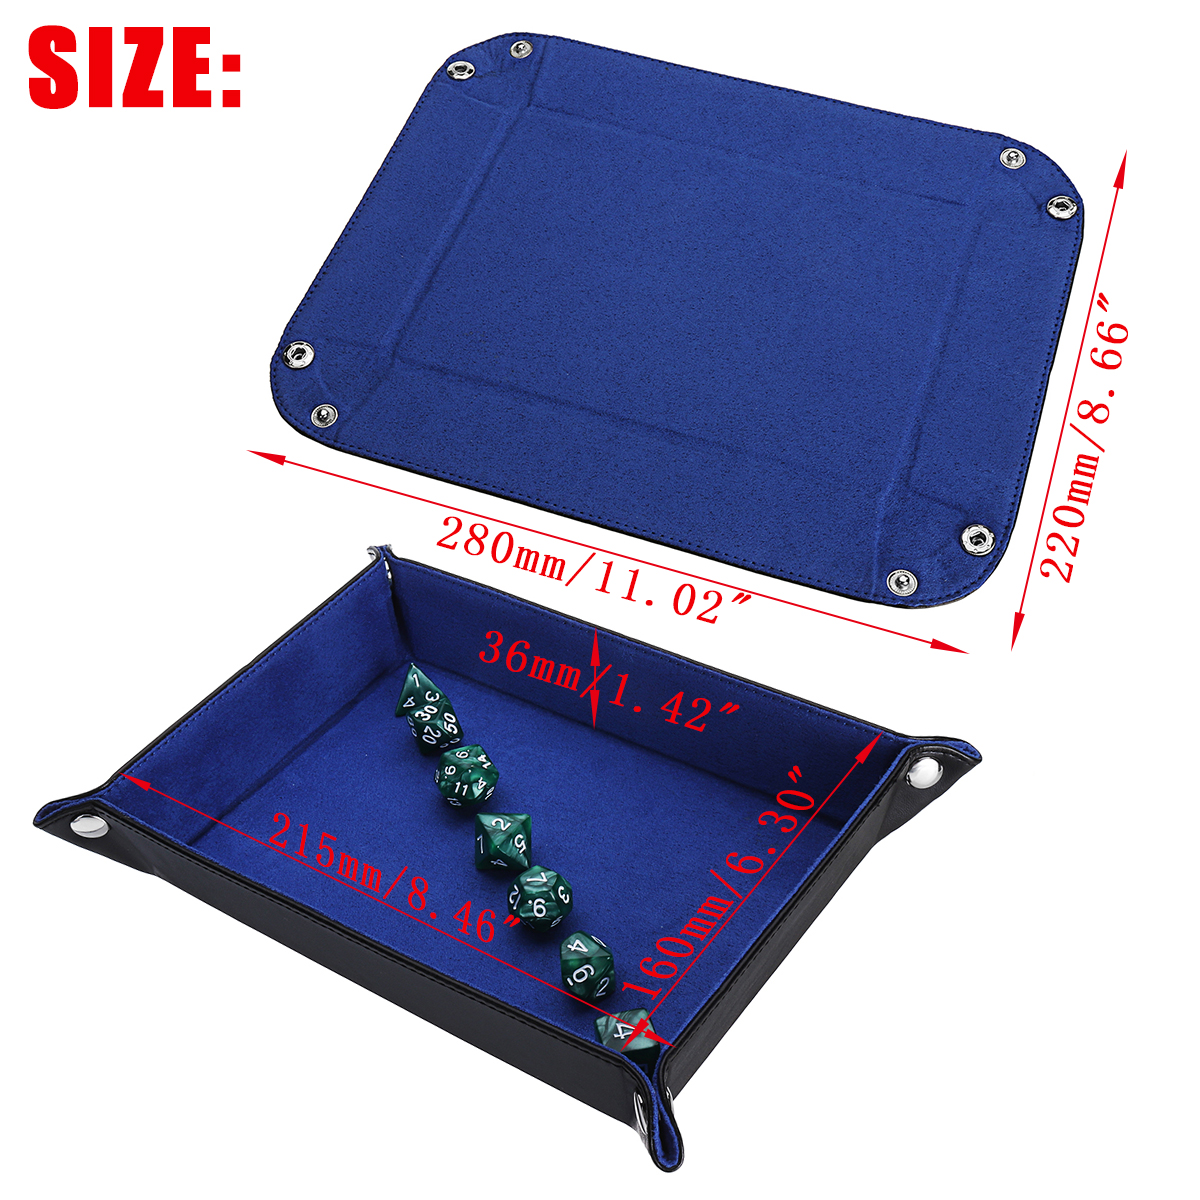 Portable-Fold-Dice-Tray-PU-Leather-with-7-Polyhedral-Dice-for-Tabletop-Dice-Games-1346582-10